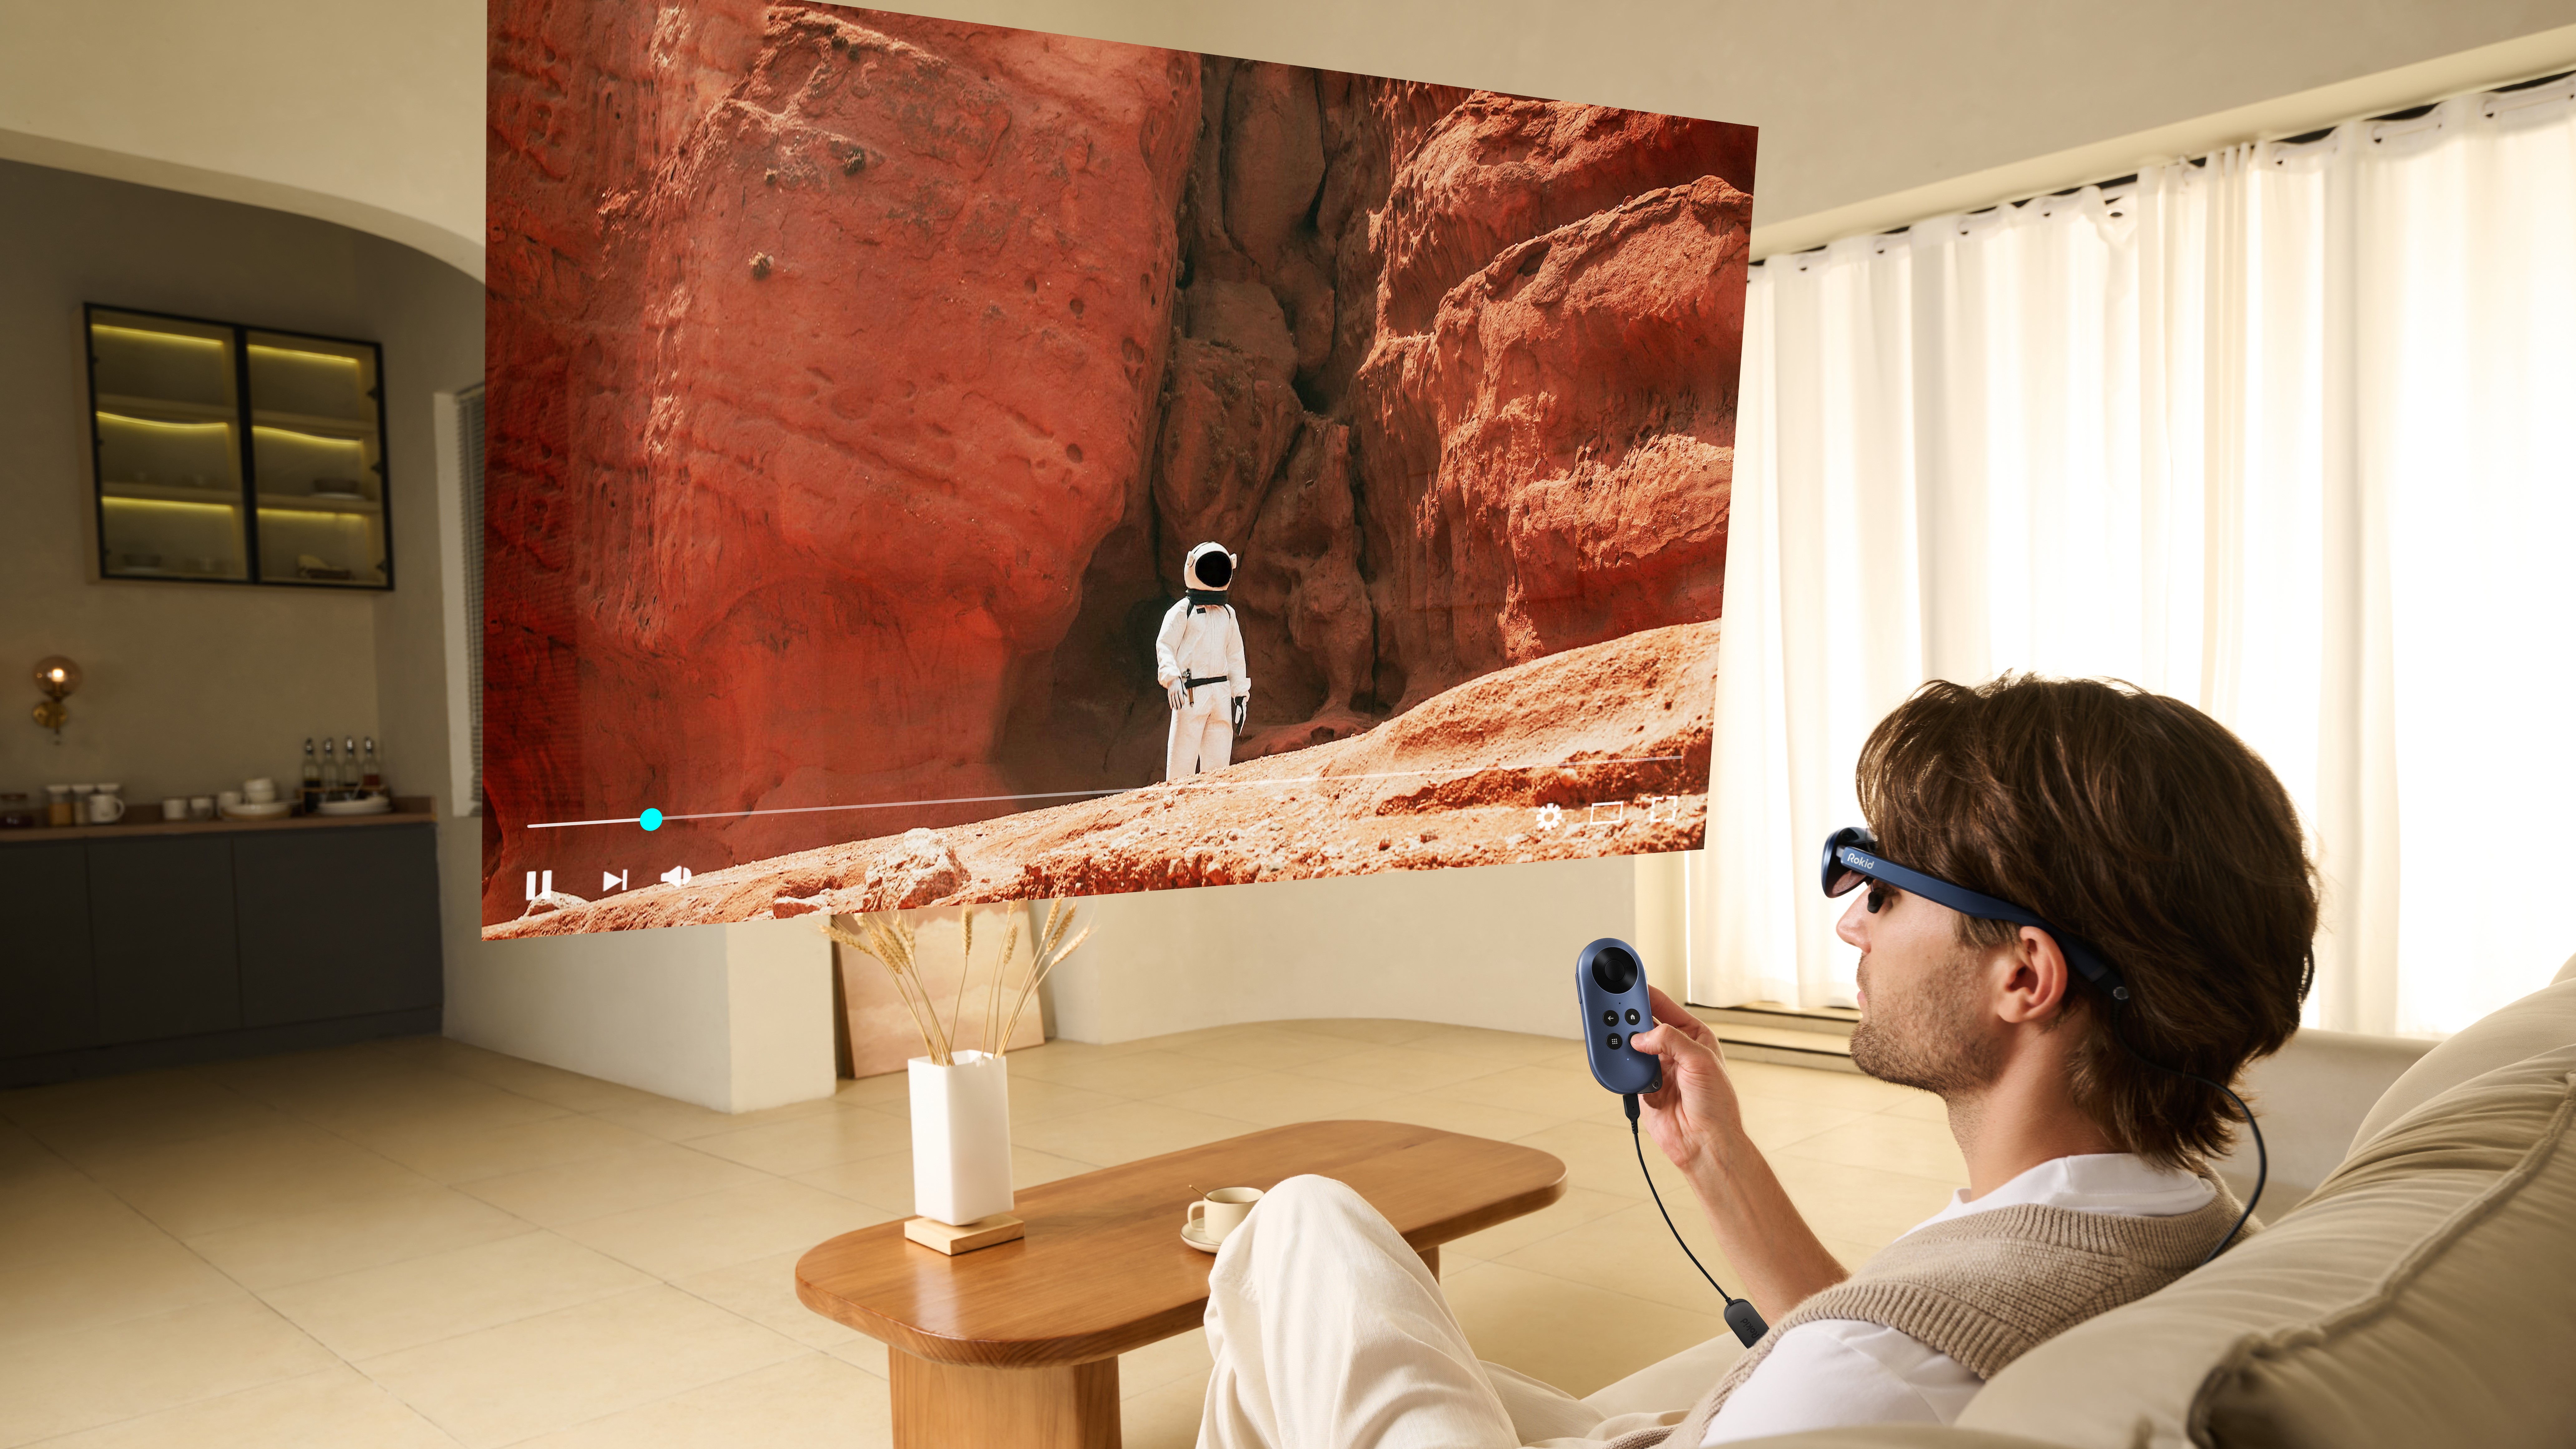 A person watching a show with someone in a space suit exploring a red planet, the screen is floating virtually in front of the person thanks to the Rokid AR glasses